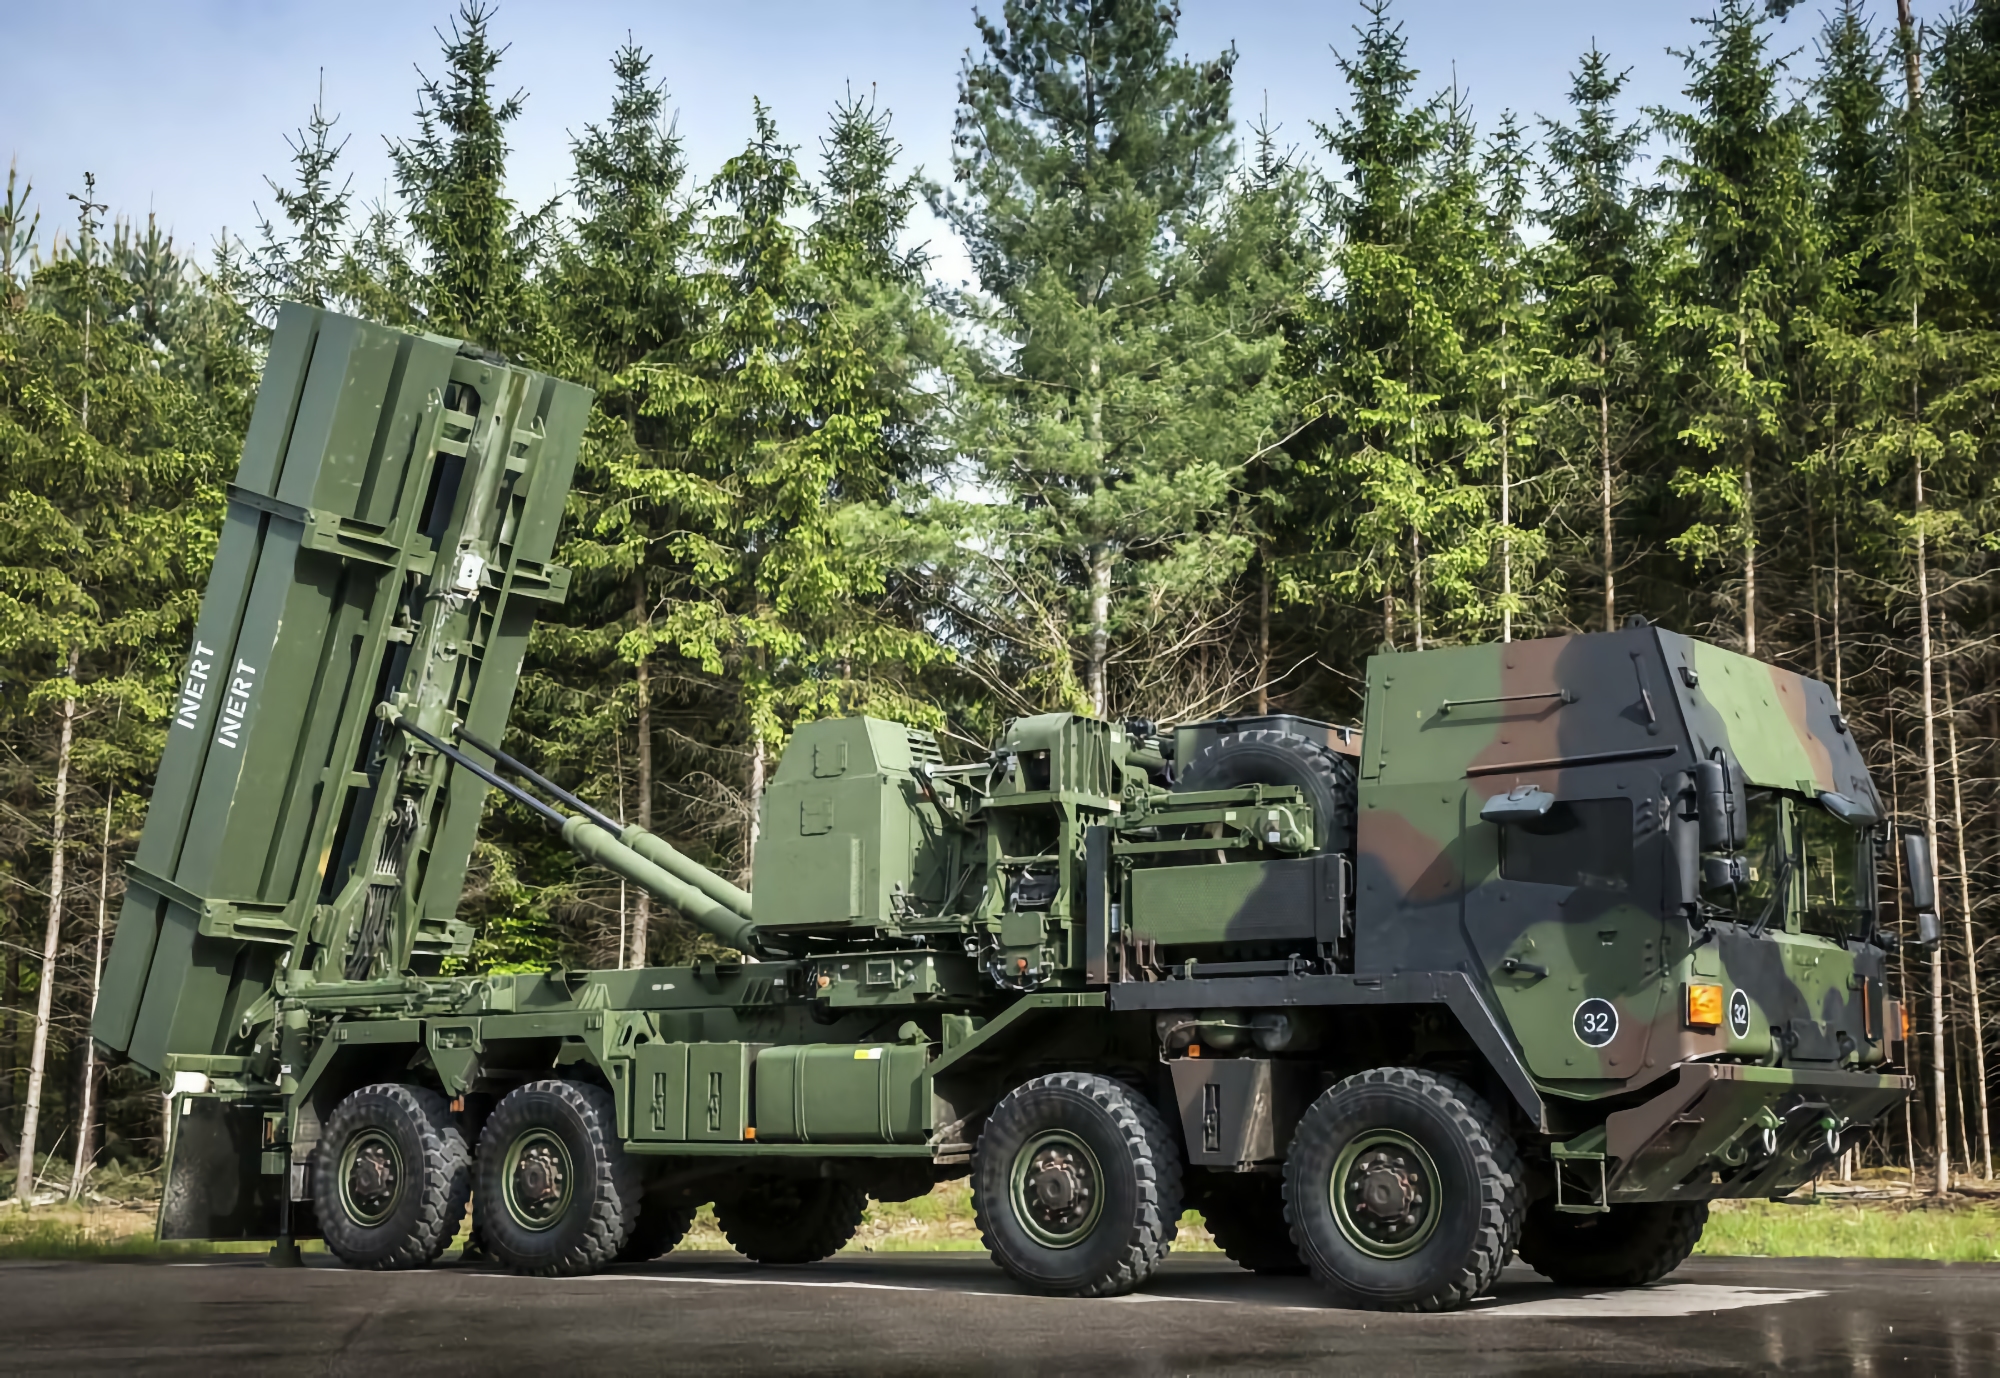 Ukraine will soon receive additional IRIS-T surface-to-air missile system from Germany